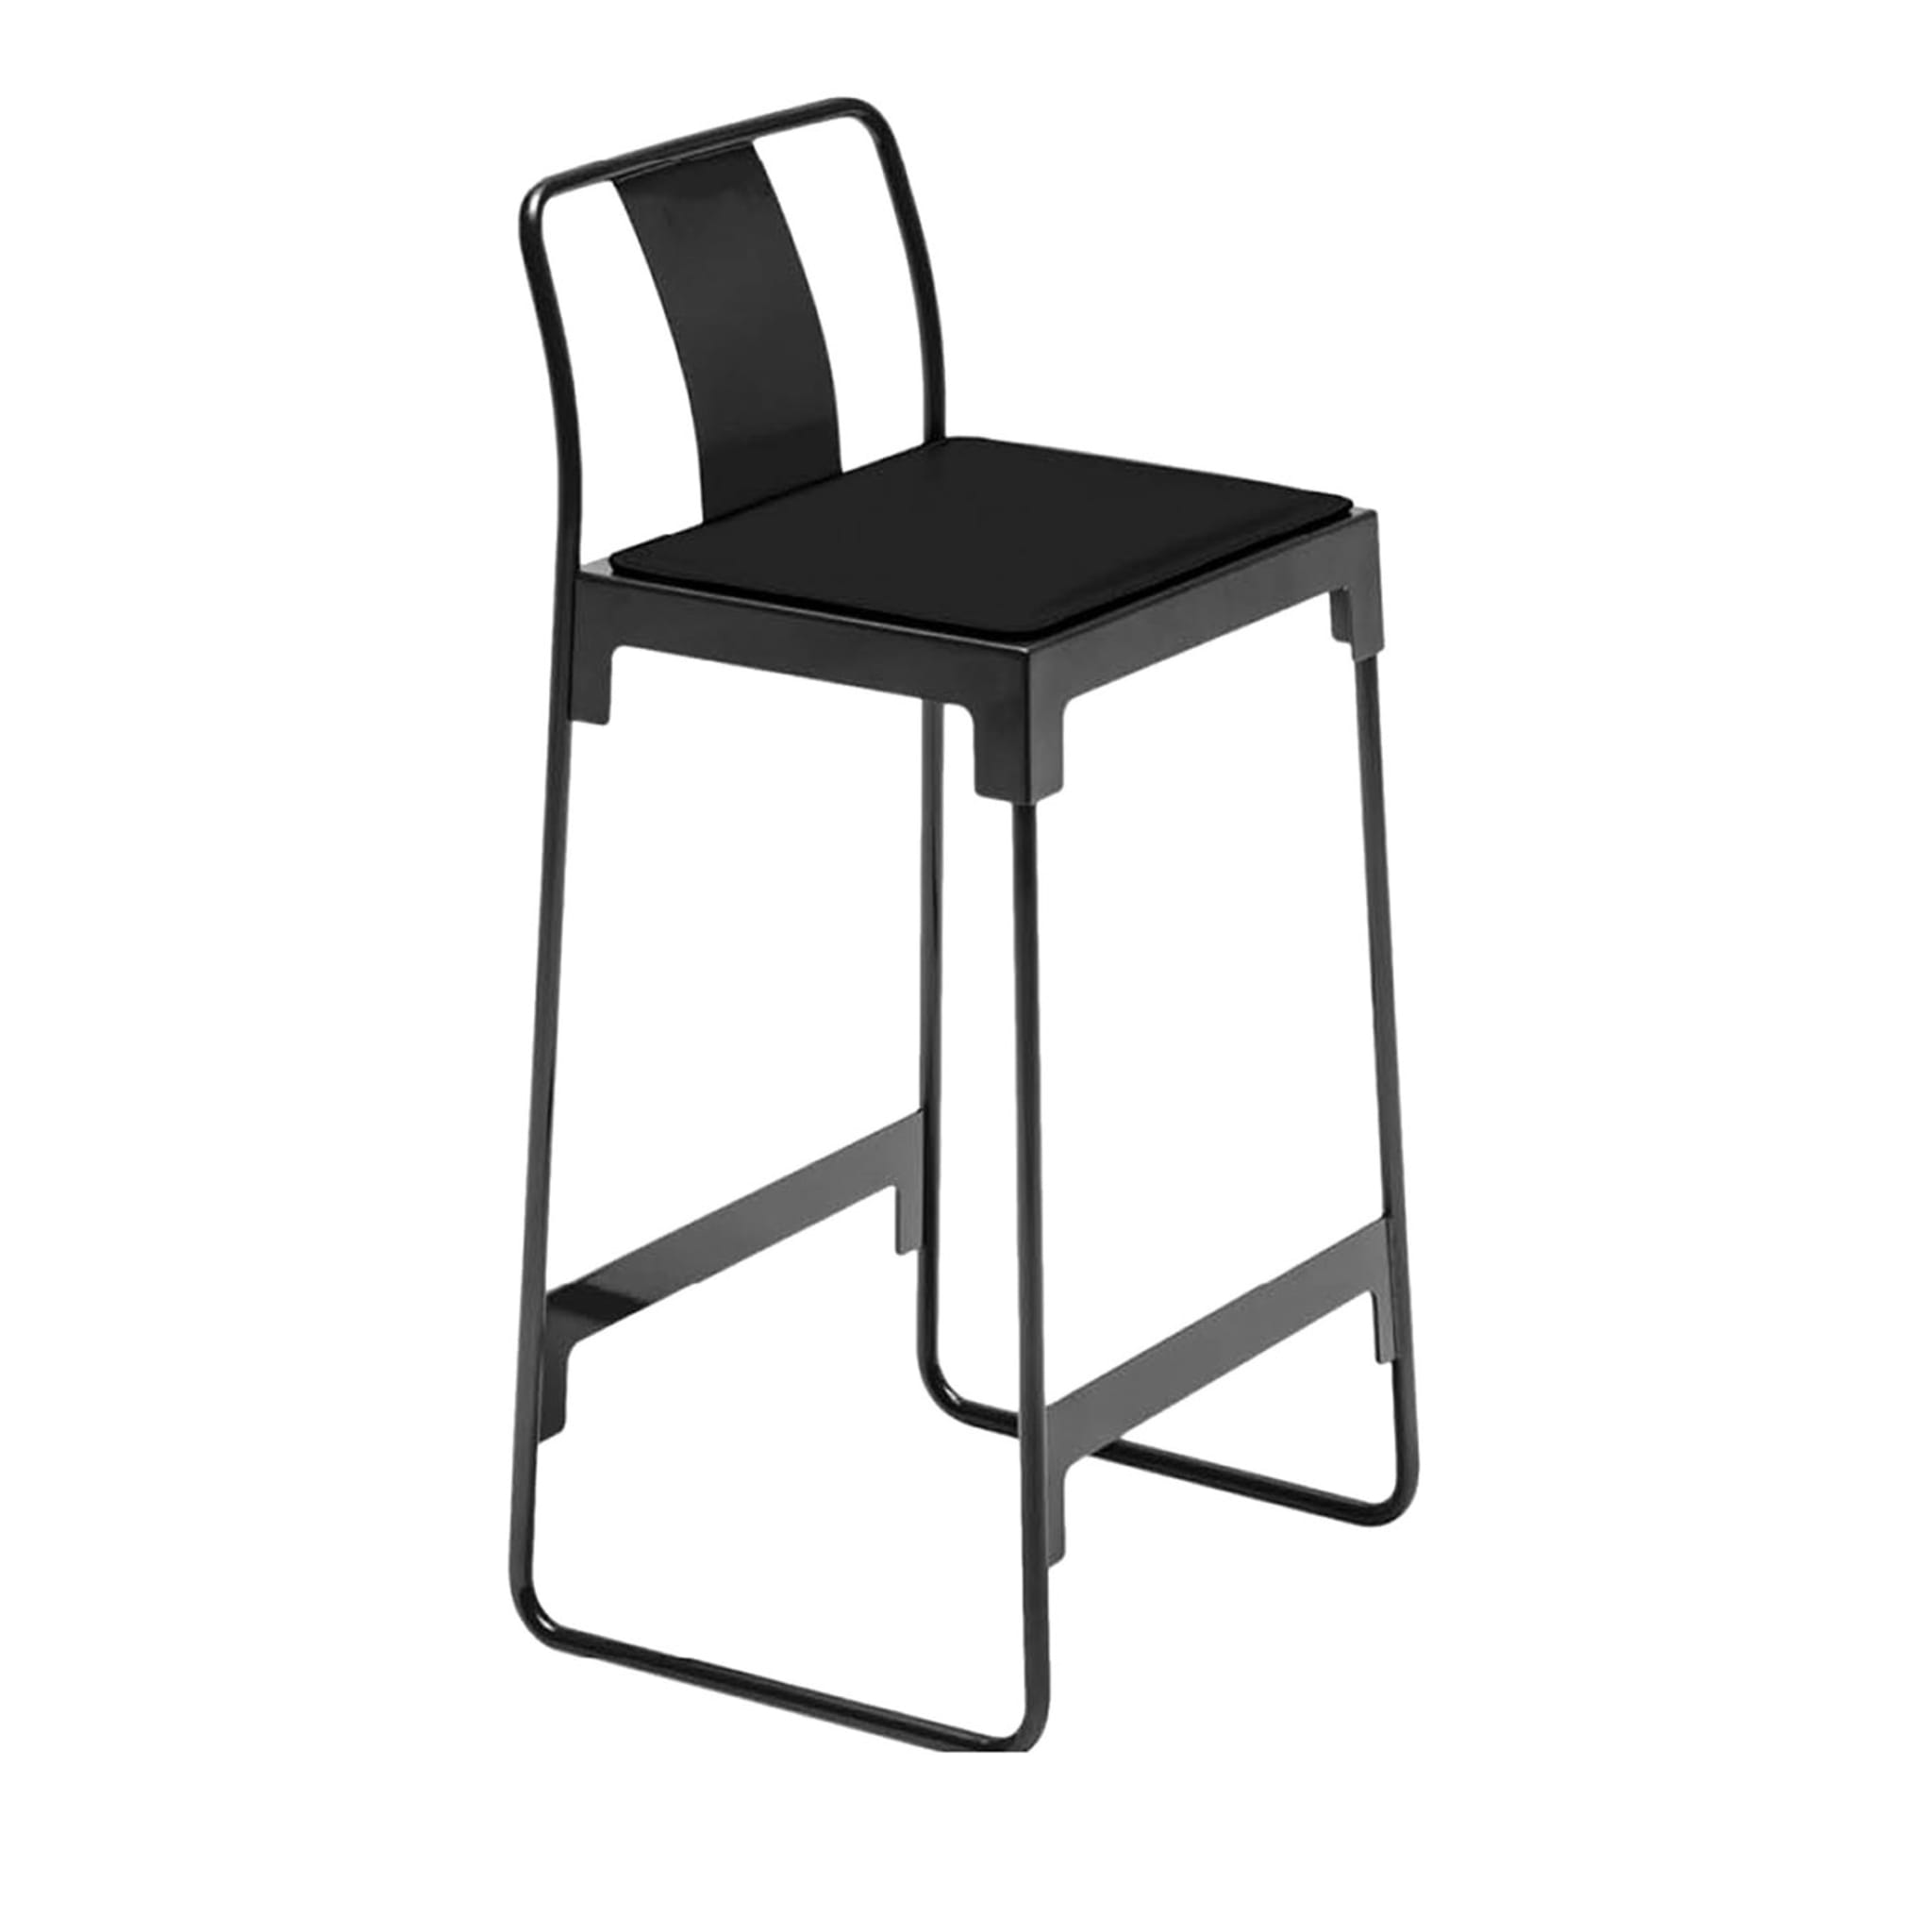 Mingx Low Black Stool with Backrest by Konstantin Grcic - Main view